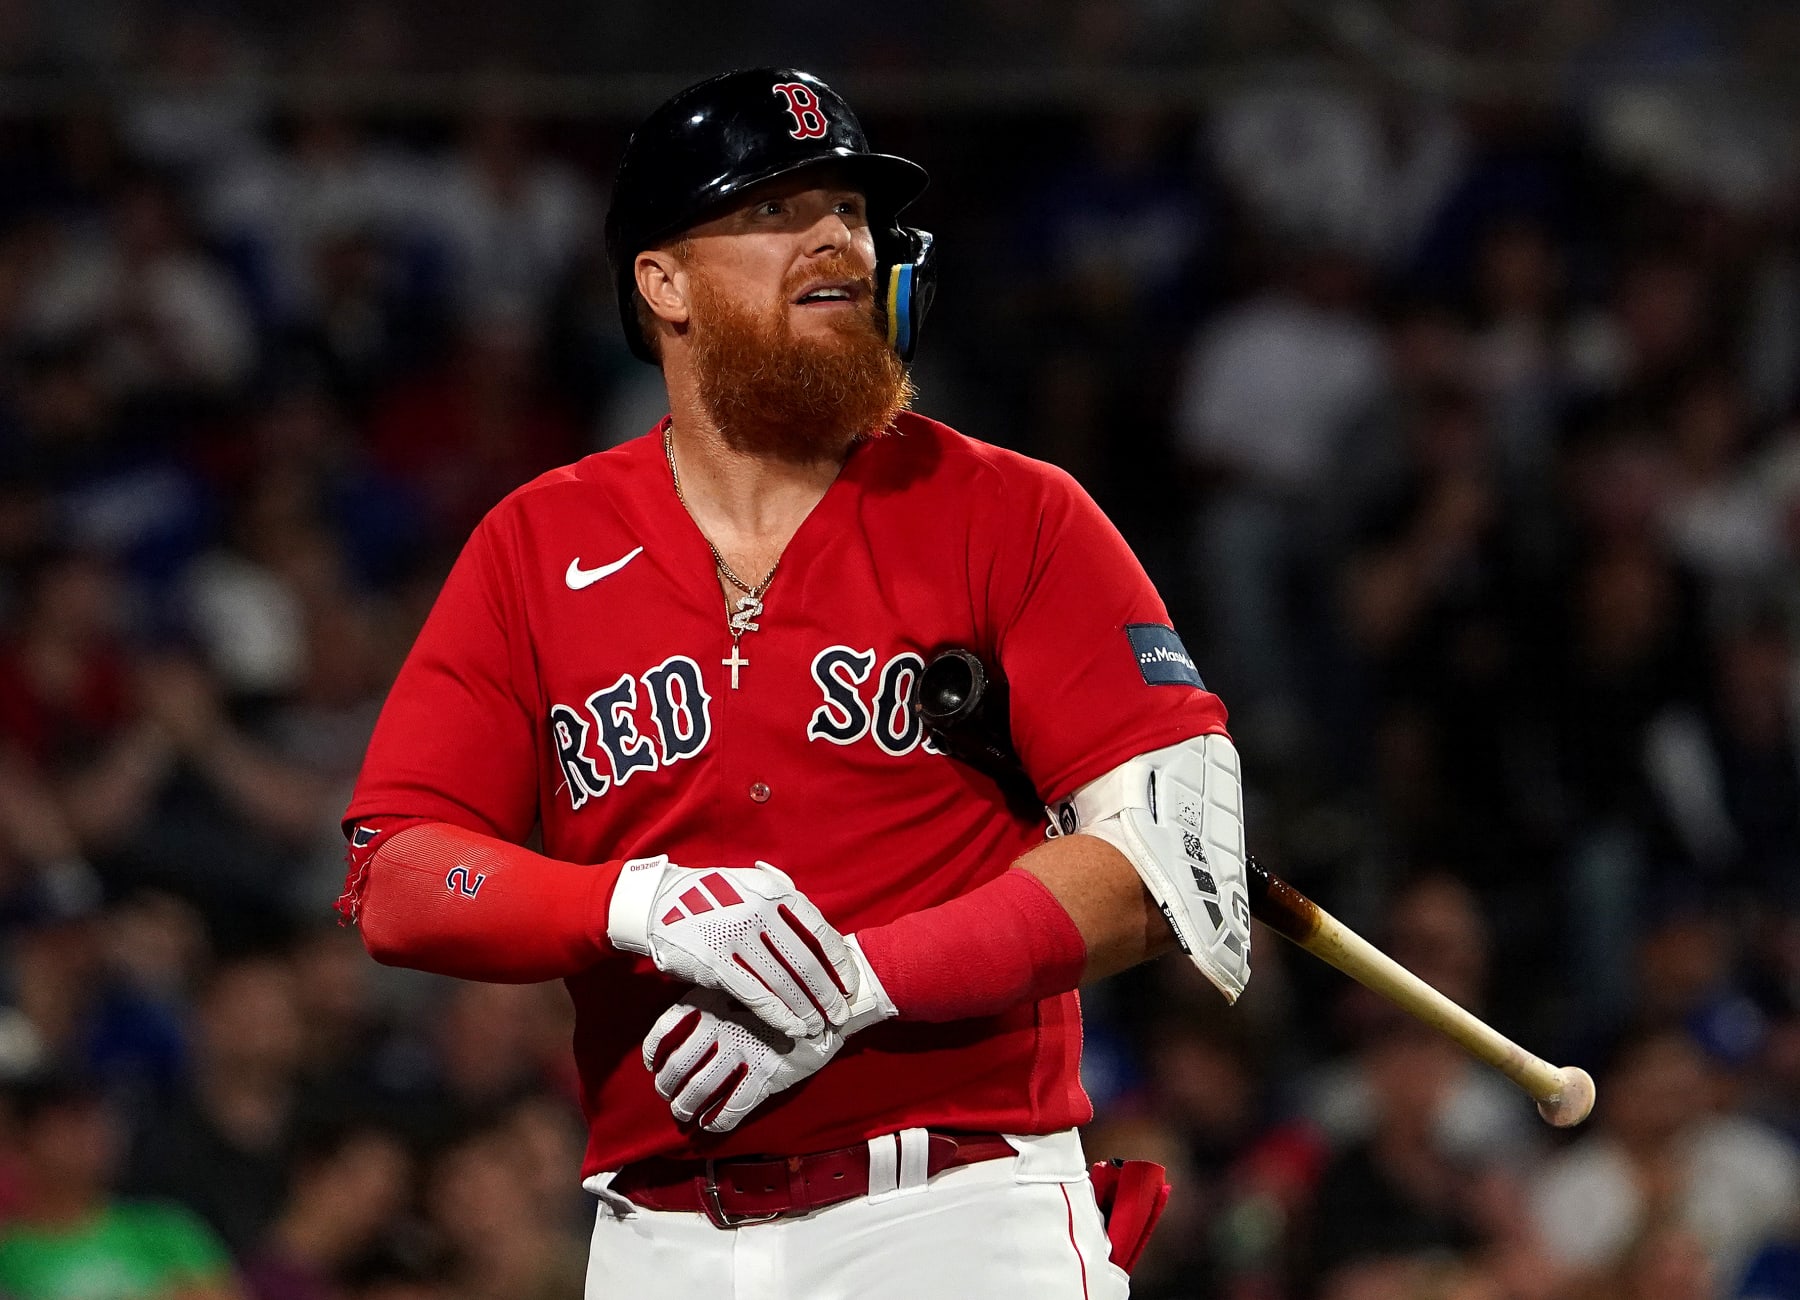 Justin Turner gets hit by pitches a lot. He says it is simply 'part of my  game.' - The Boston Globe